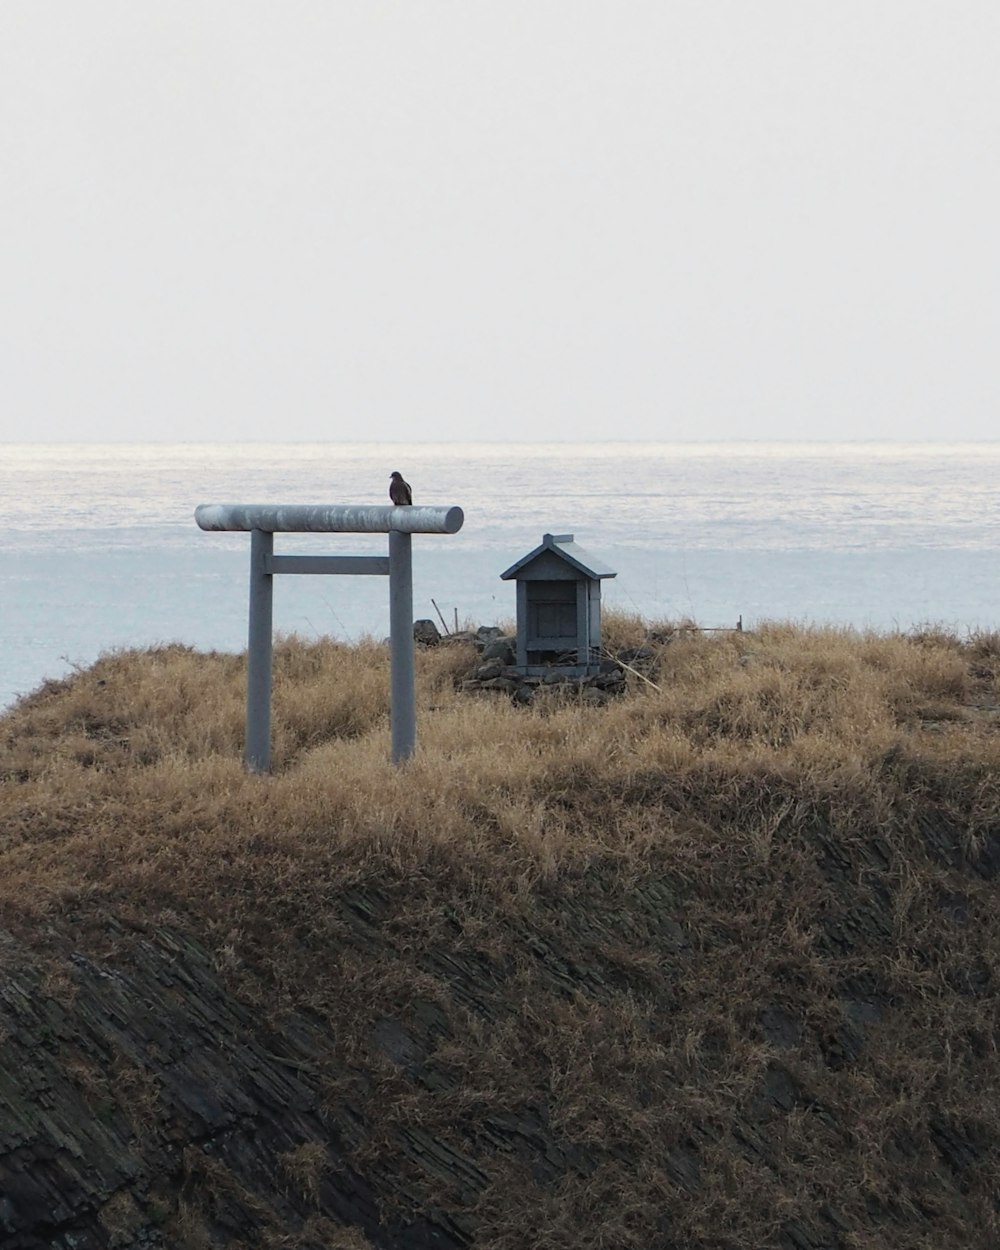 a bird is sitting on a bench on a hill